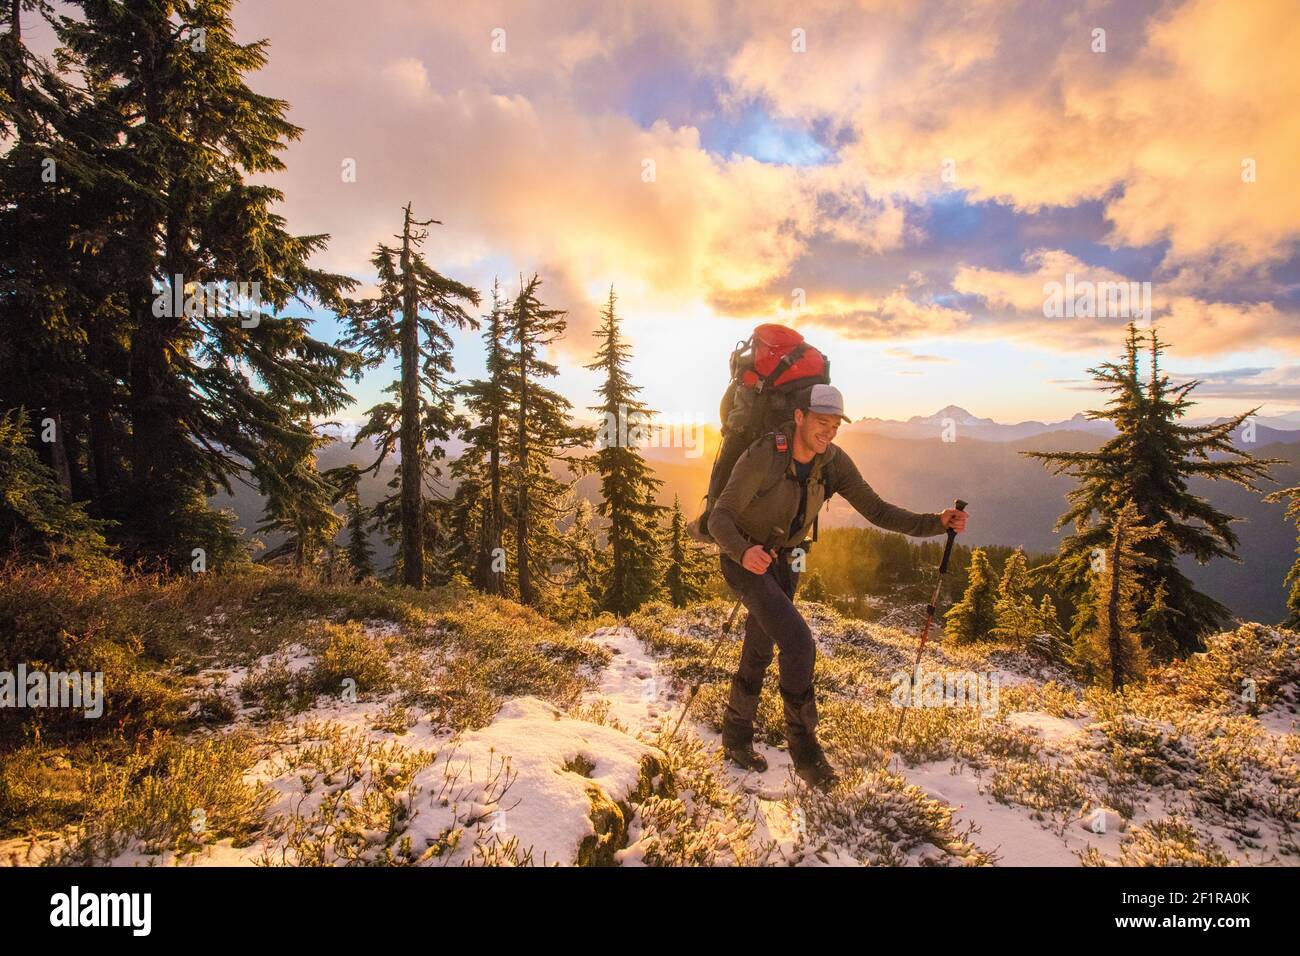 Backpacker enjoy the mountain view during sunet. Stock Photo